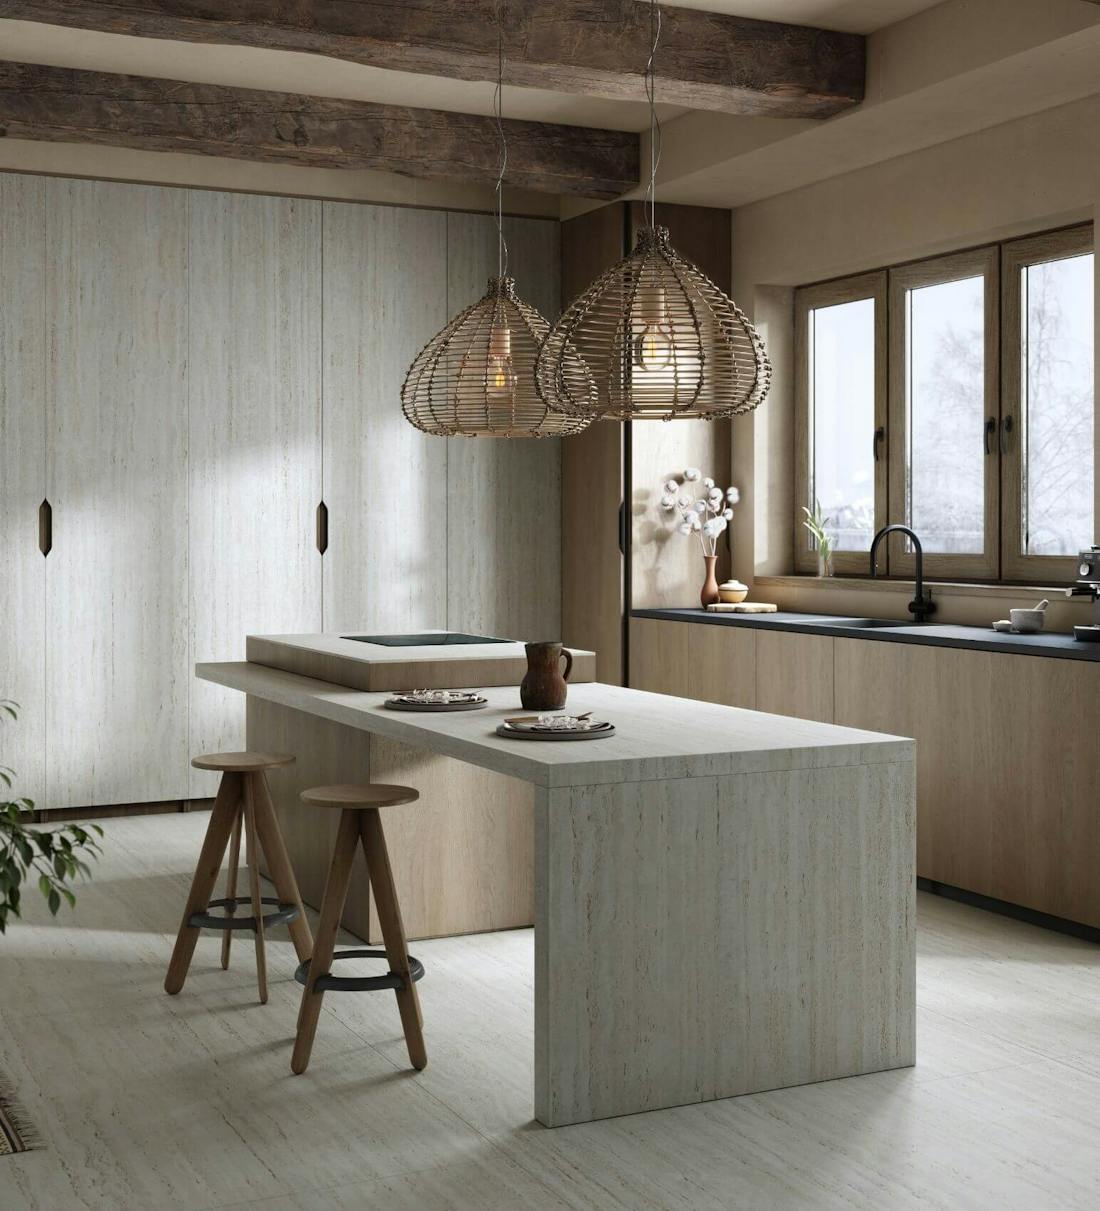 Travertine: the most iconic stone of Ancient Rome is back, renewed and more durable than ever